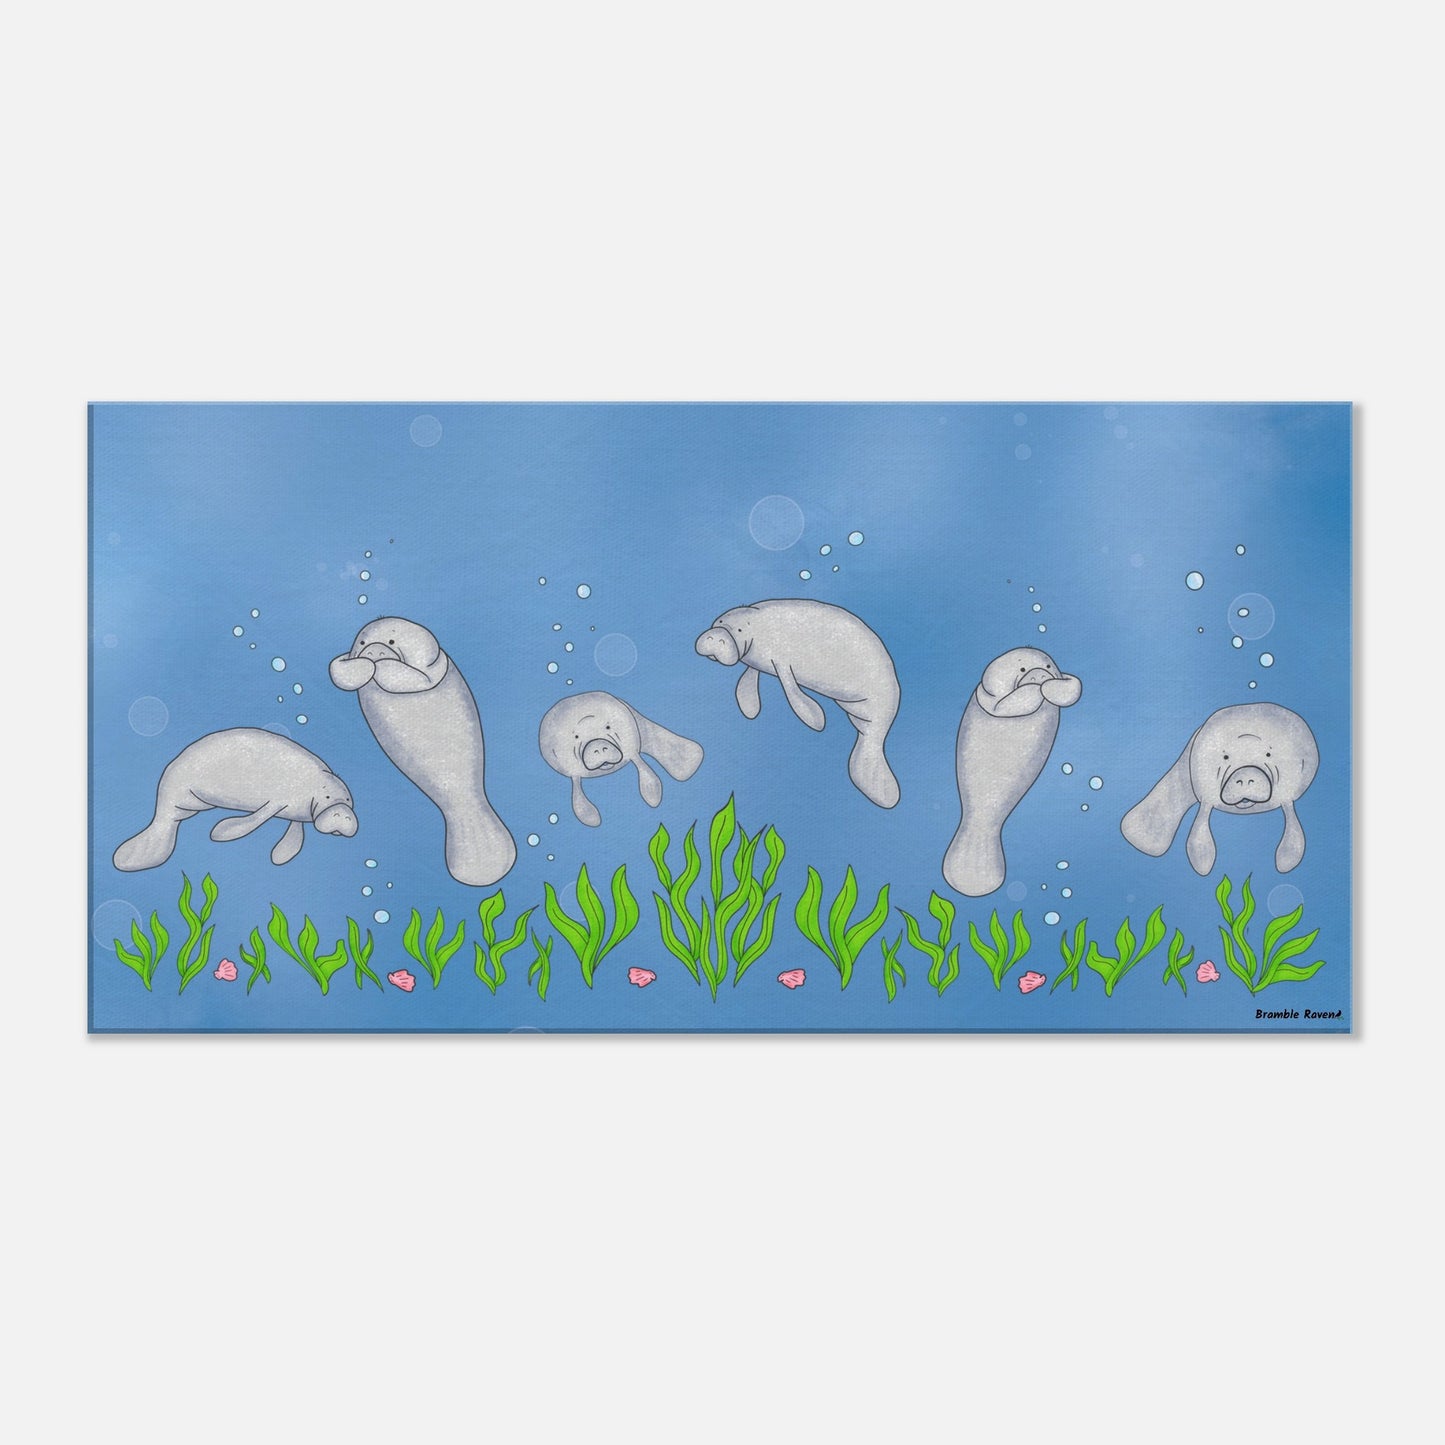 12 by 24 inch slim canvas wall art print featuring cute illustrated manatees swimming above the seabed. Hanging hardware included.